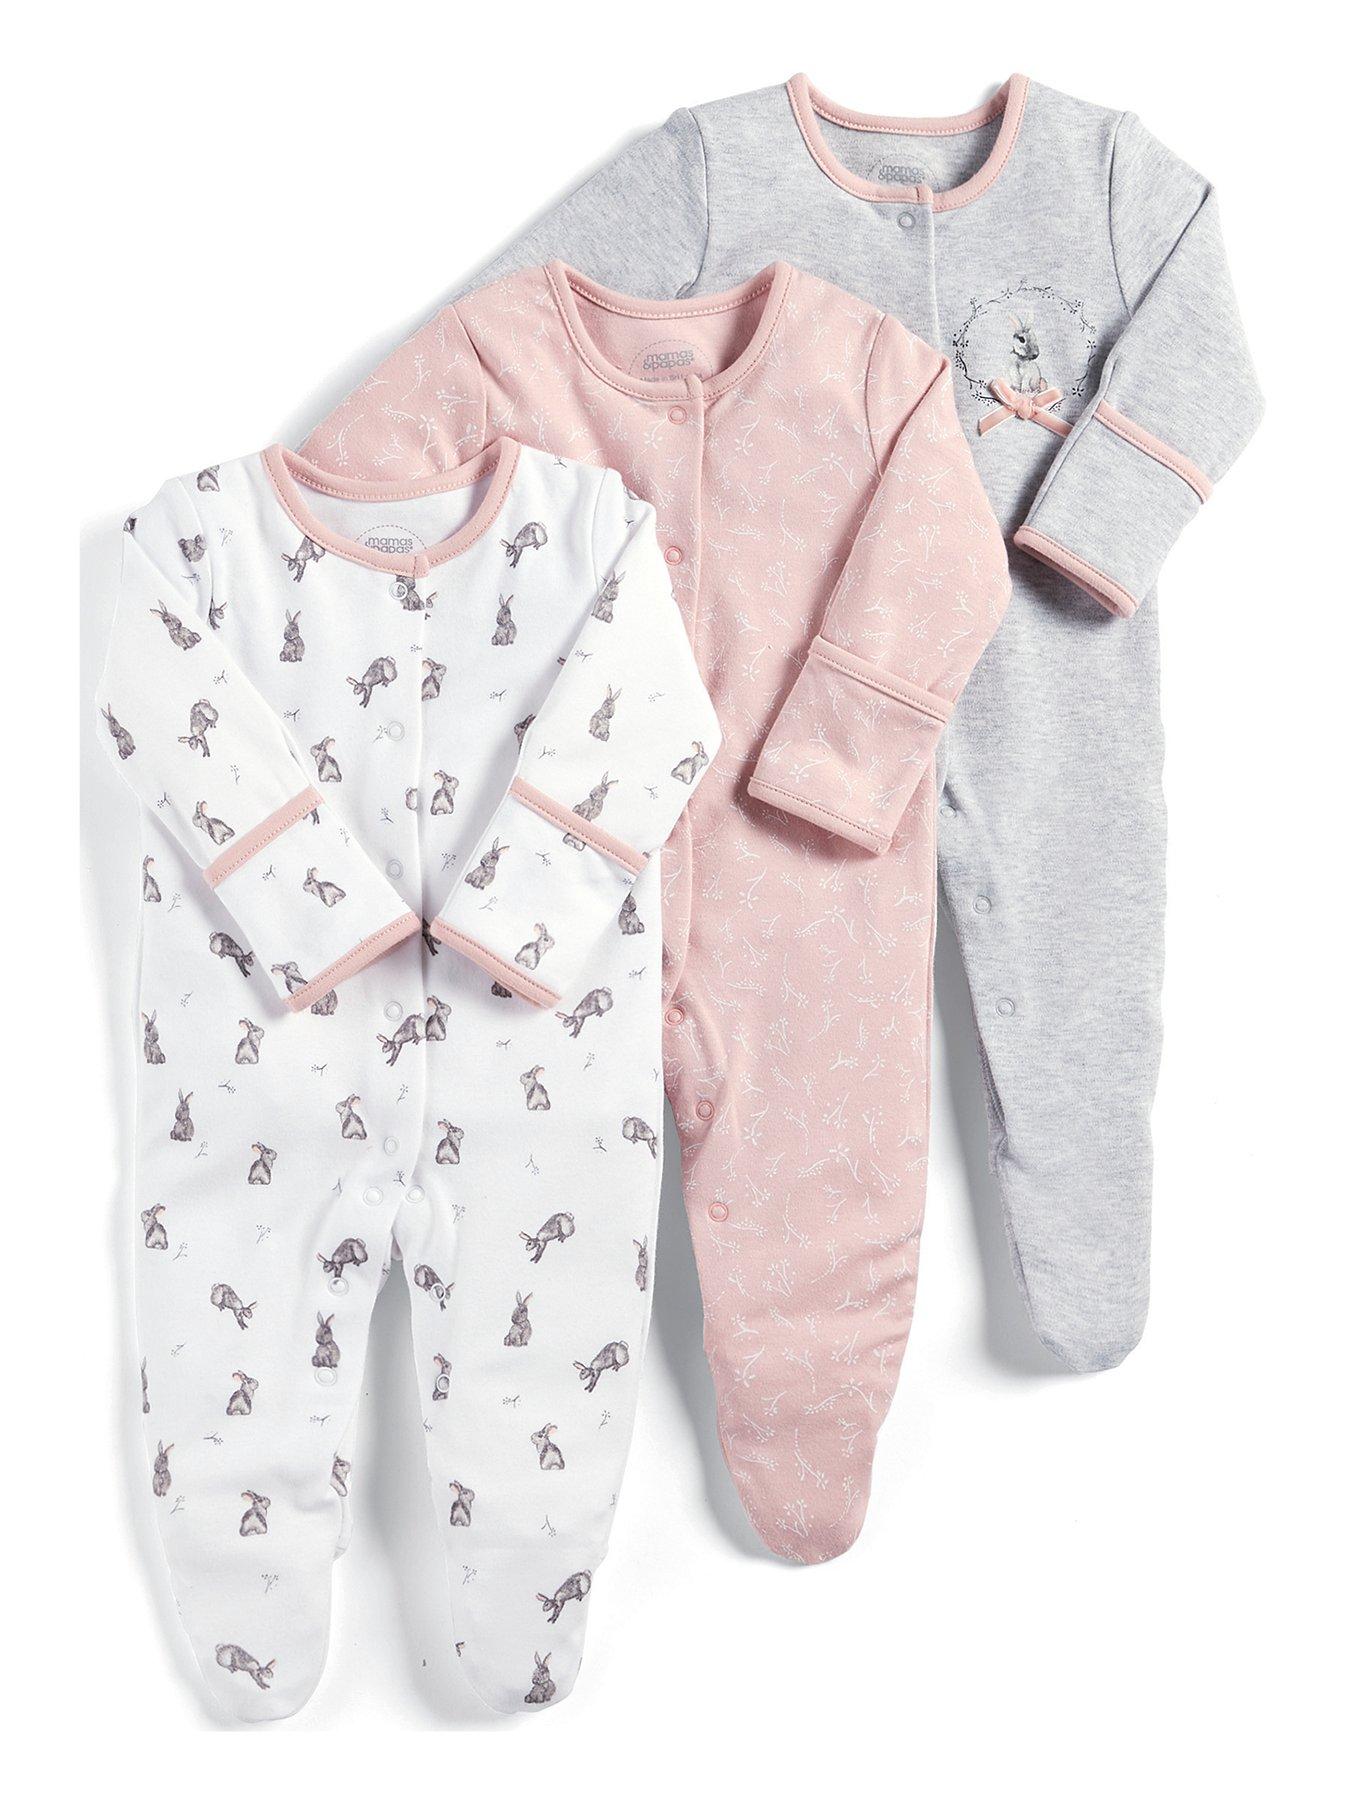 mamas and papas baby sleepsuits